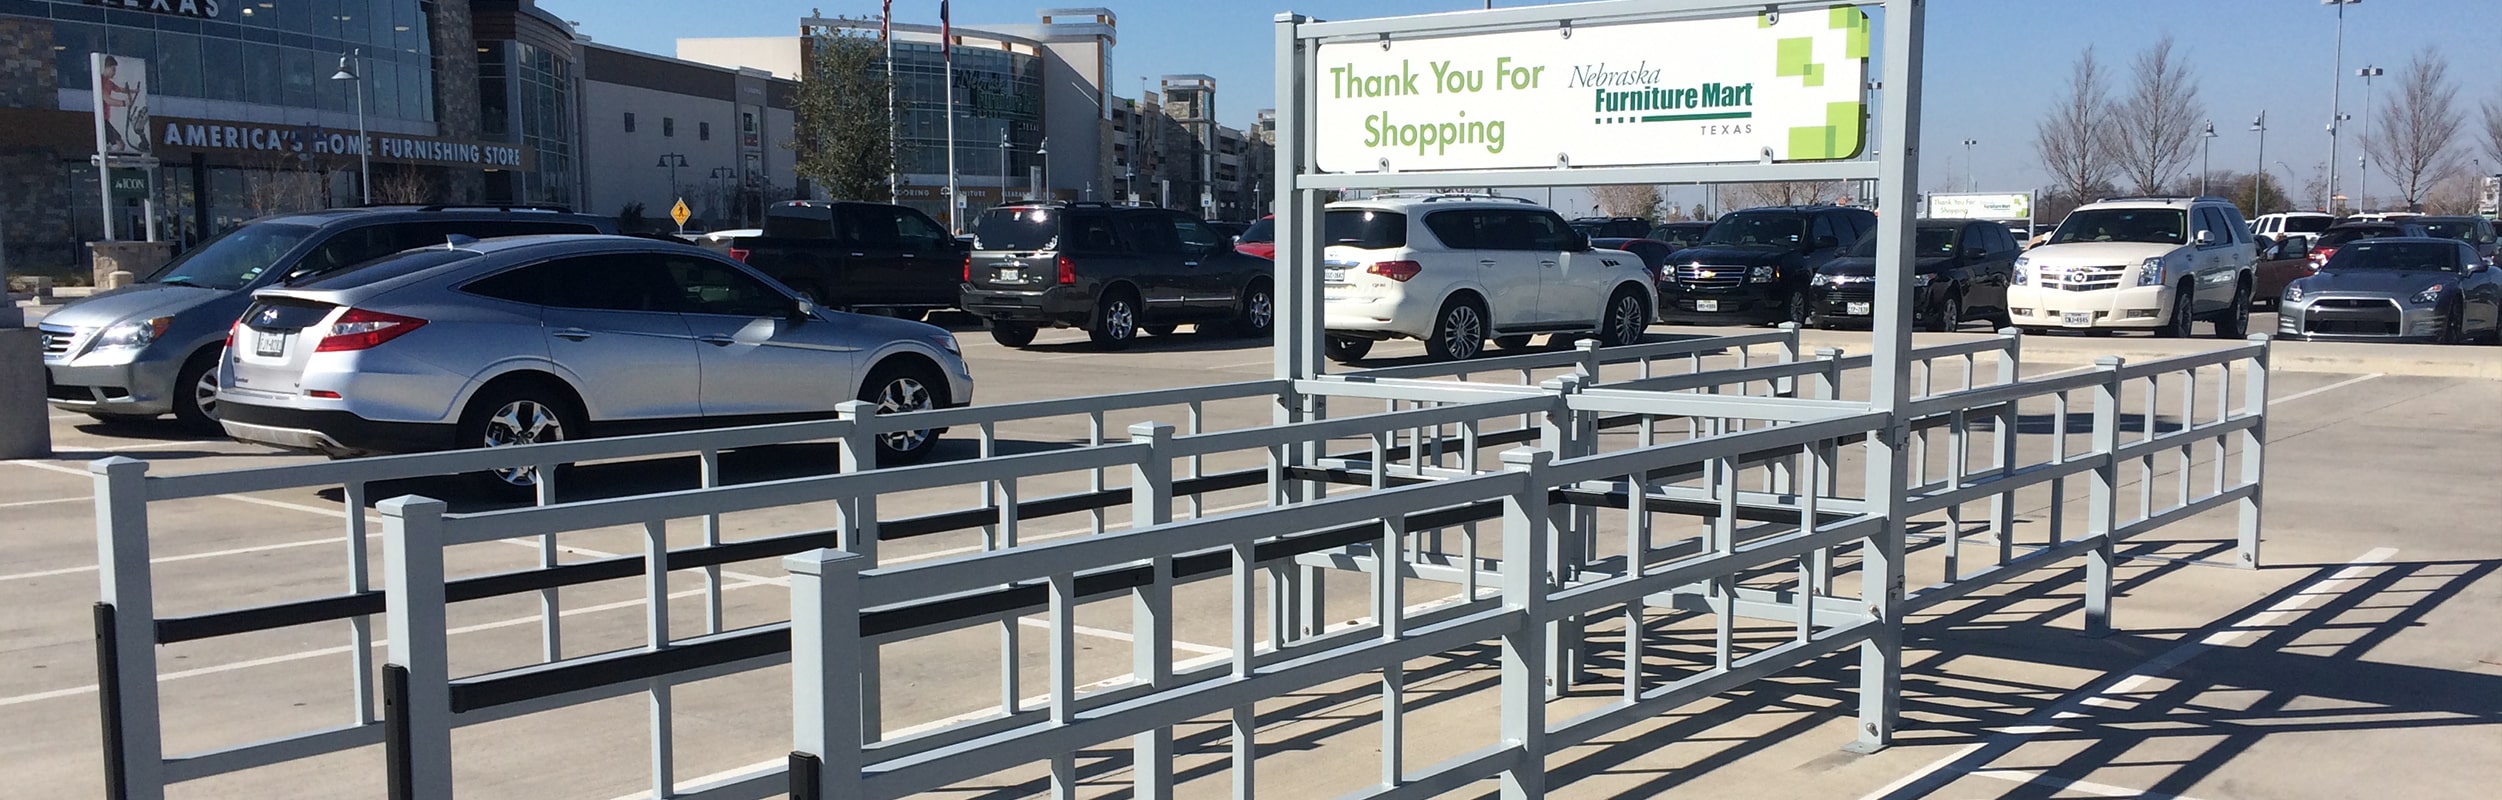 Cart Corral in Store Parking Lot